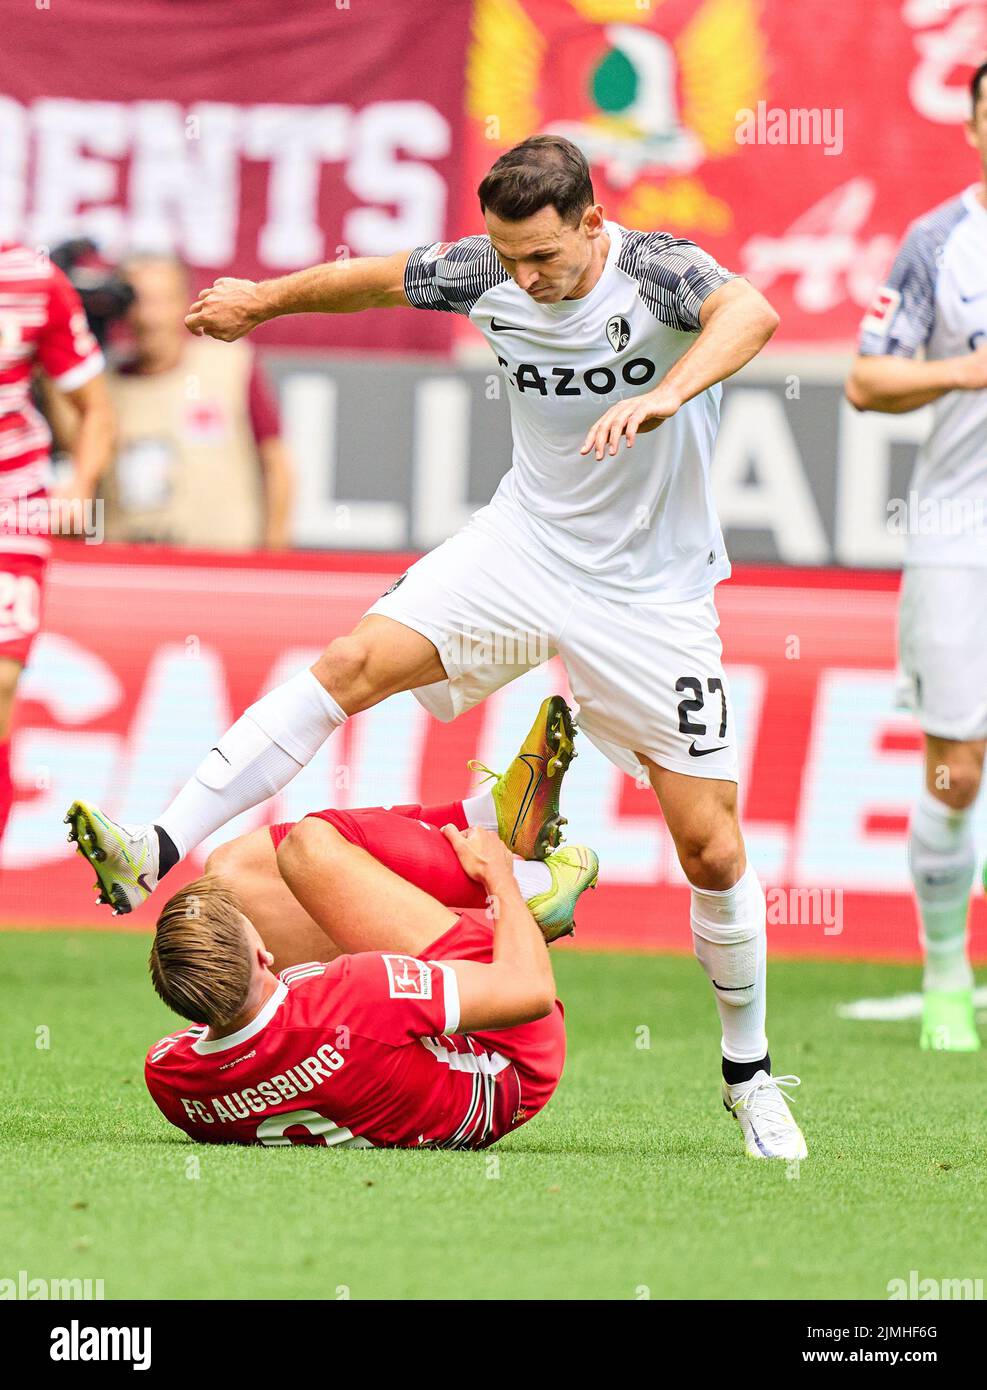 Nicolas Höfler, FRG 27  compete for the ball, tackling, duel, header, zweikampf, action, fight against Ermedin Demirovic, FCA 9  in the match FC AUGSBURG - SC FREIBURG 0-4 1.German Football League on Aug 06, 2022 in Augsburg, Germany. Season 2022/2023, matchday 1, 1.Bundesliga, FCB, Munich, 1.Spieltag © Peter Schatz / Alamy Live News    - DFL REGULATIONS PROHIBIT ANY USE OF PHOTOGRAPHS as IMAGE SEQUENCES and/or QUASI-VIDEO - Stock Photo